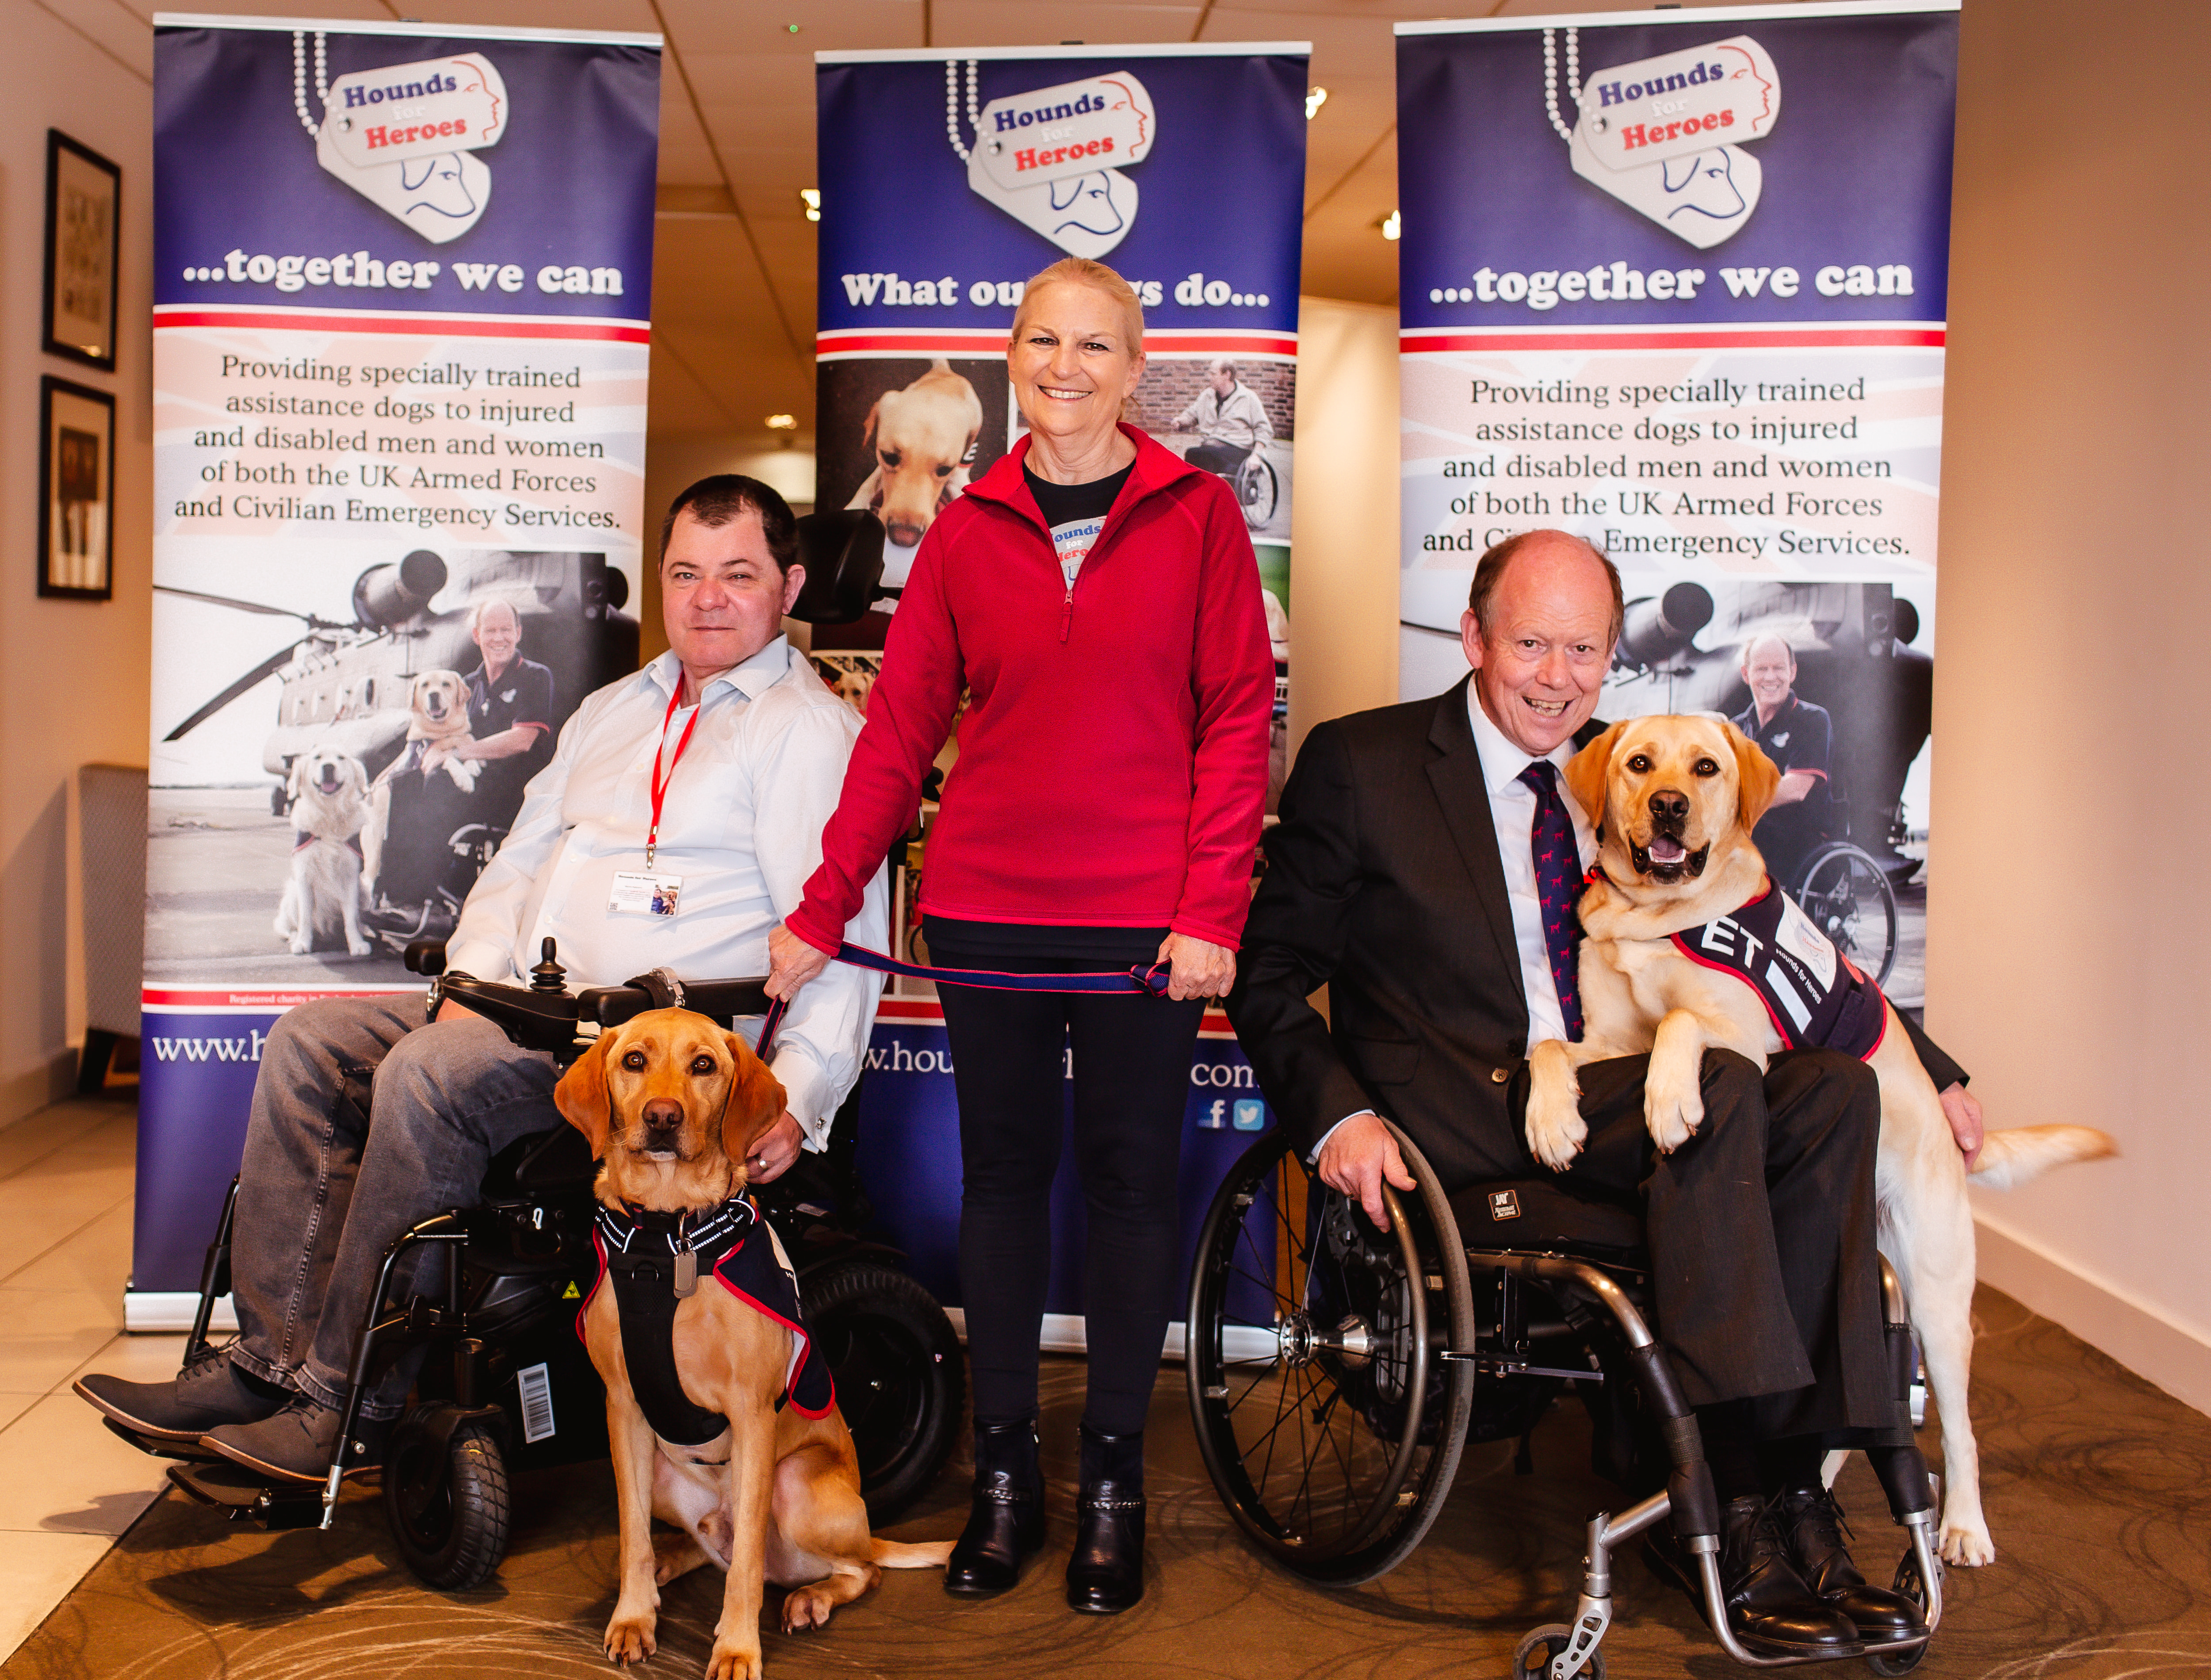 2 Men in wheelchairs with their assistance dogs. Lady stood between them.